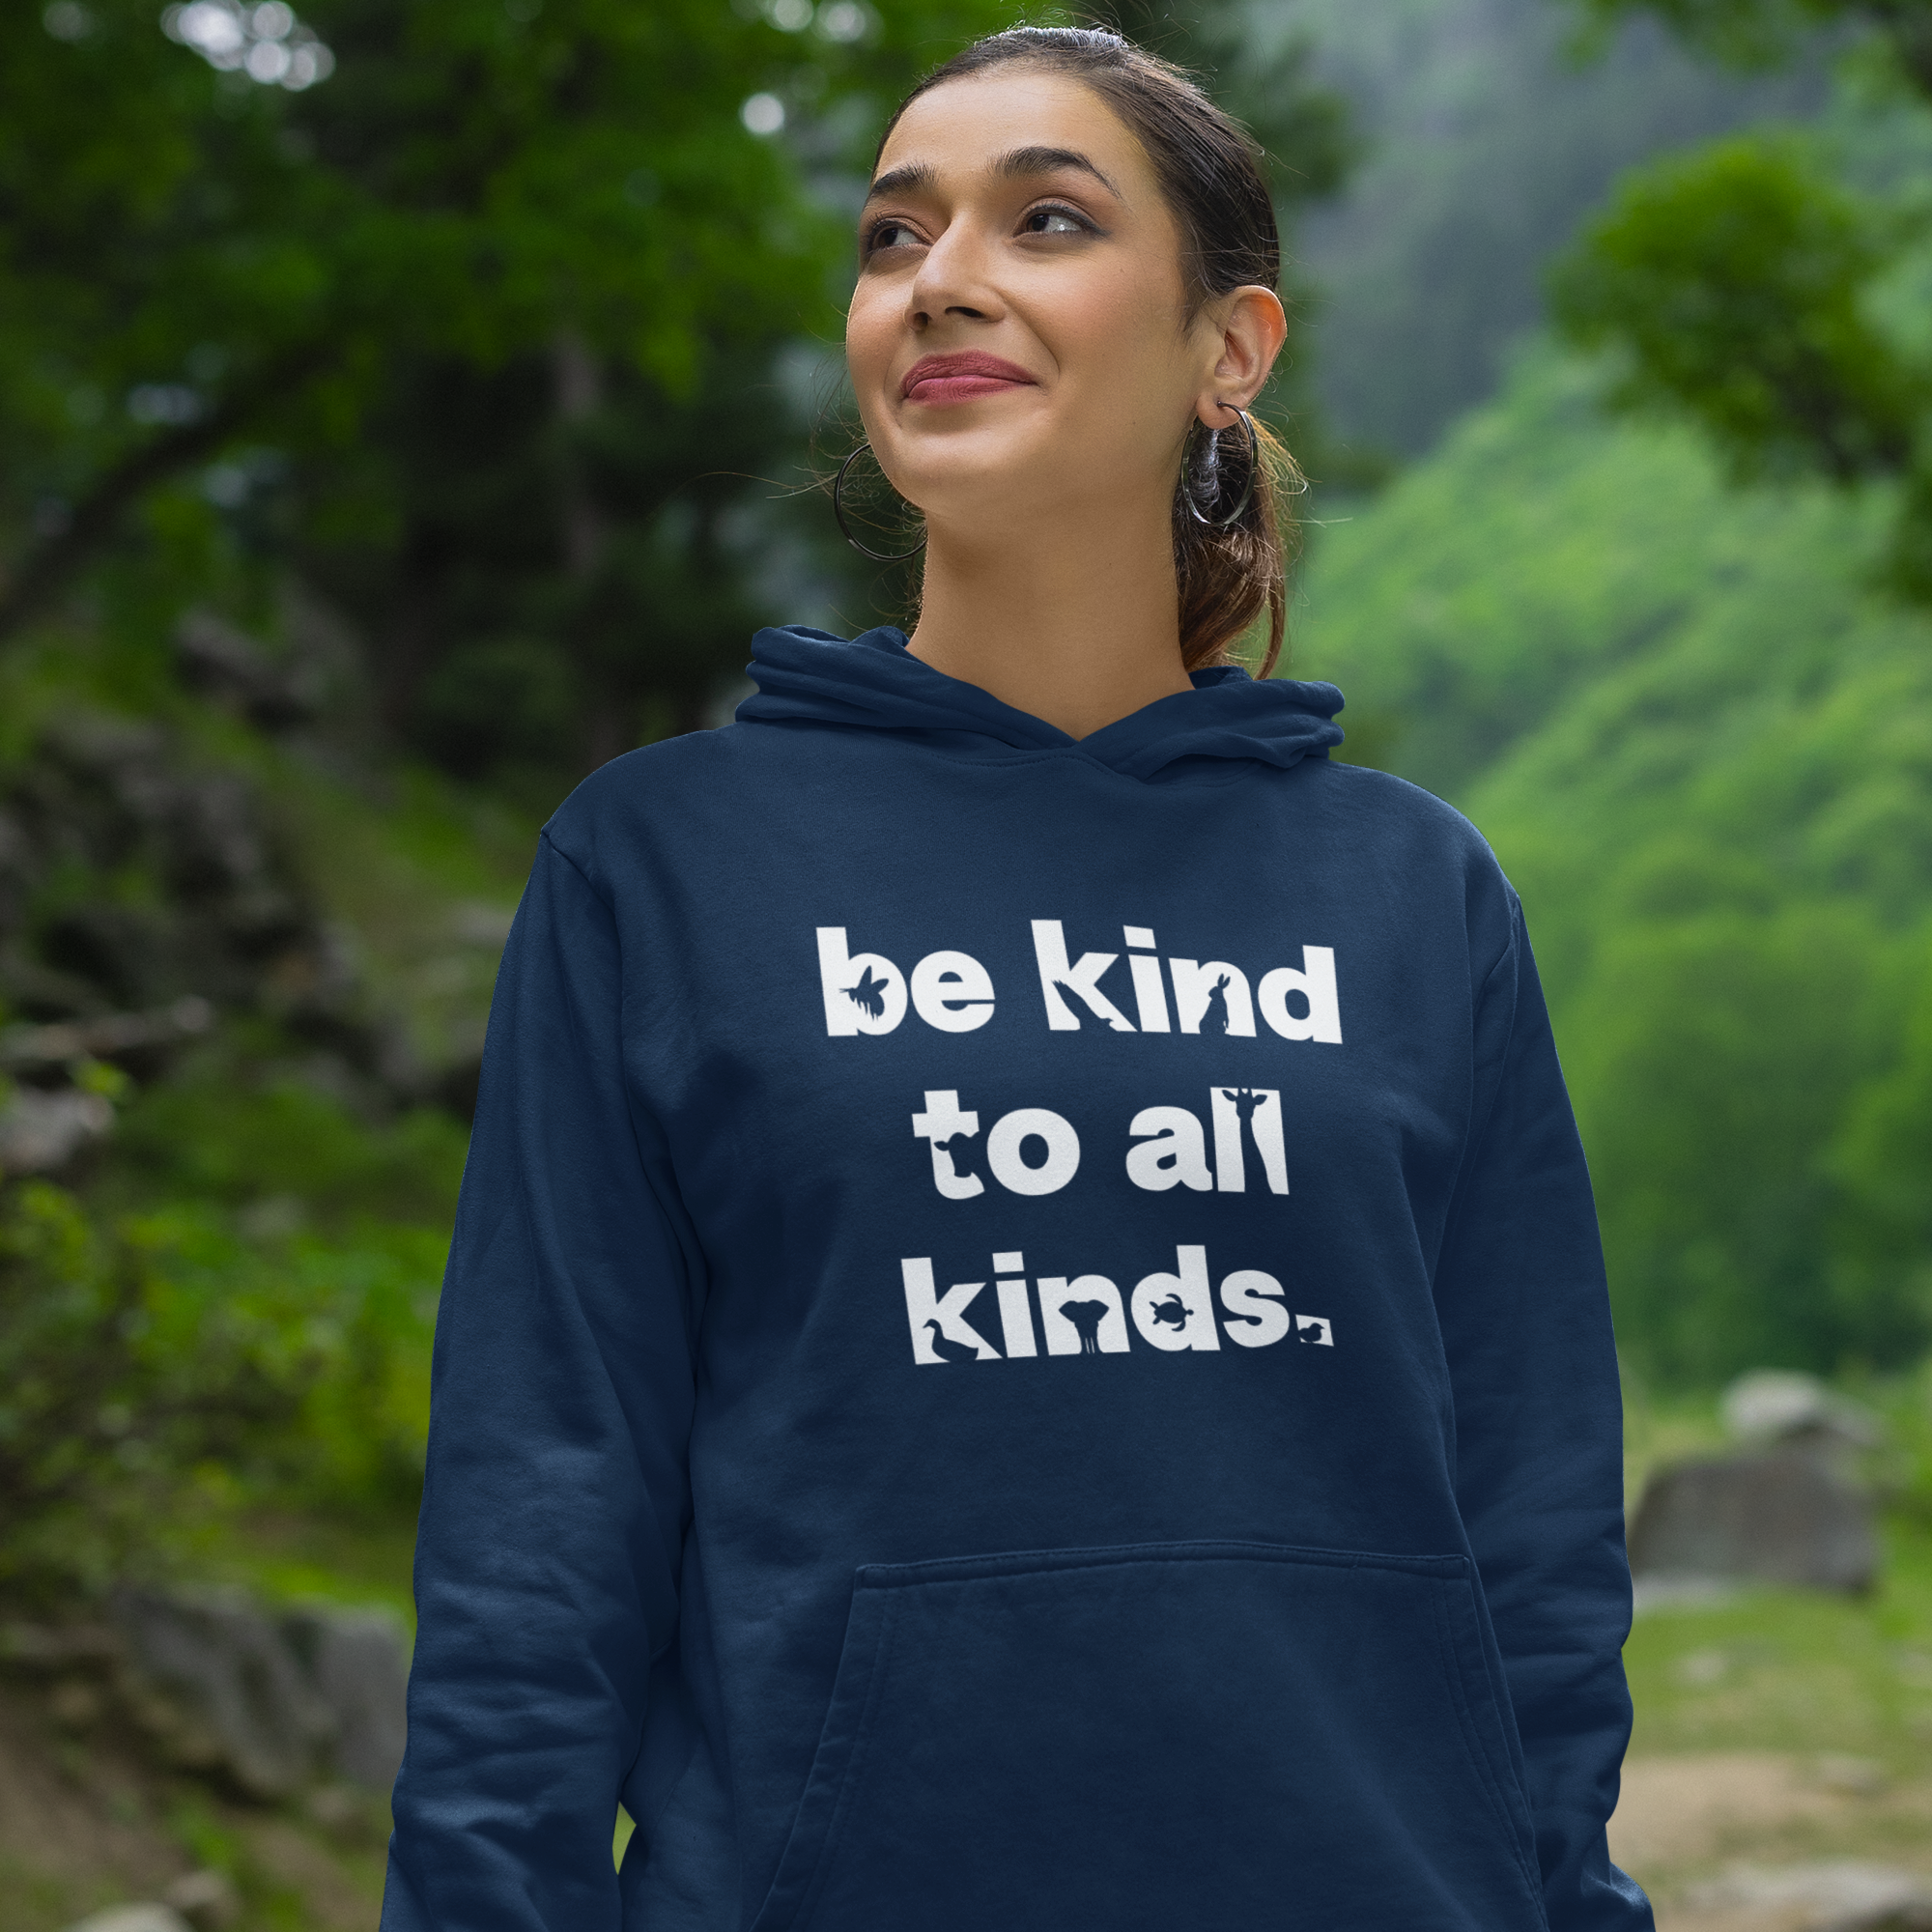 be kind to all kinds. - Damen Hoodie